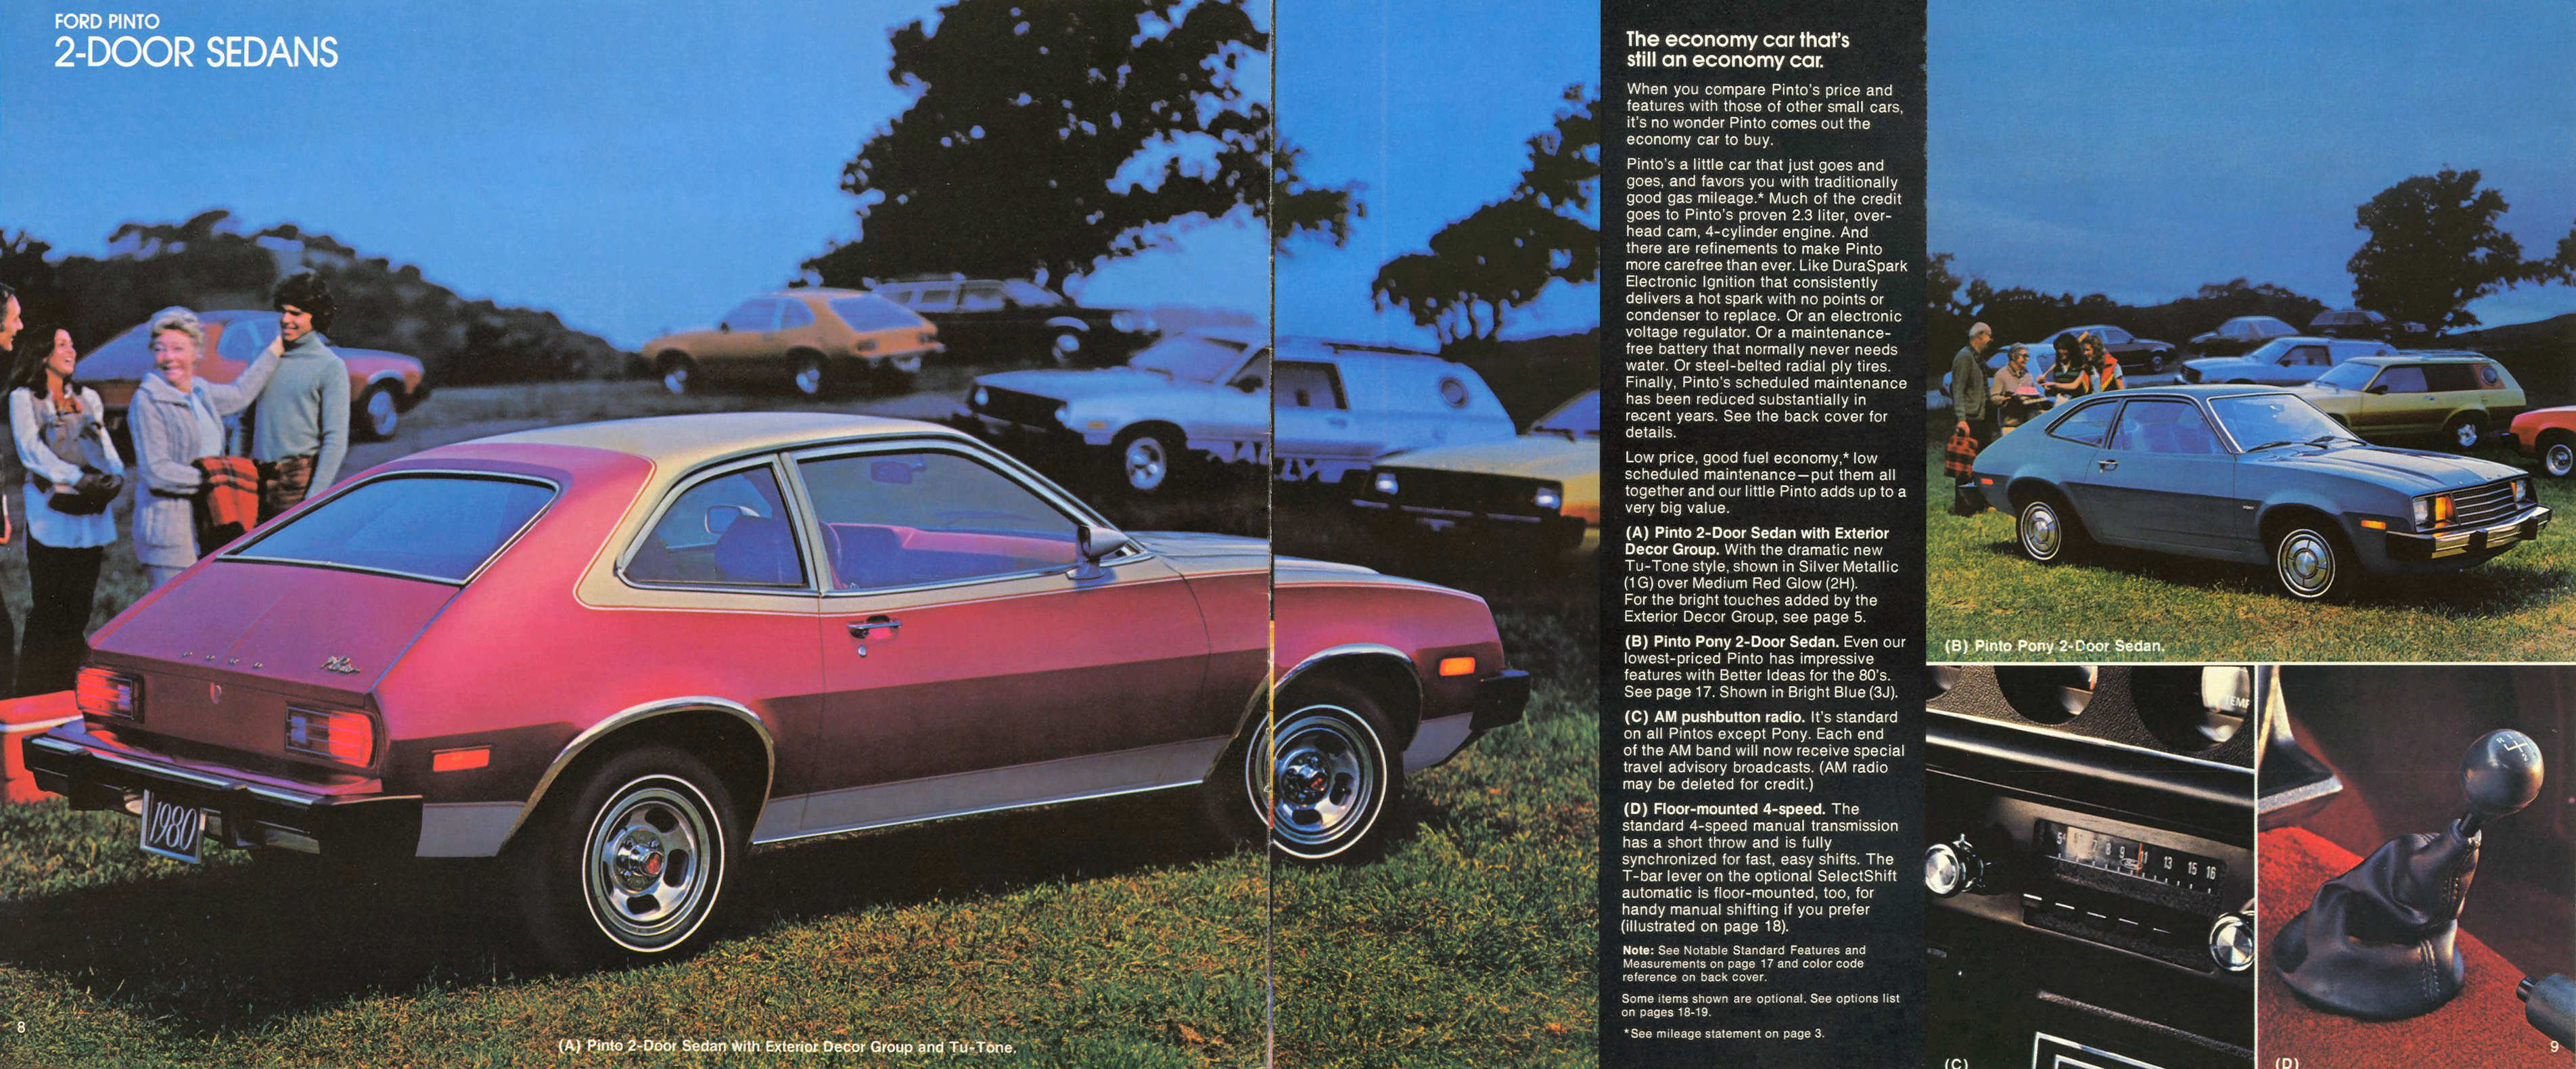 1980_Ford_Pinto-08-09